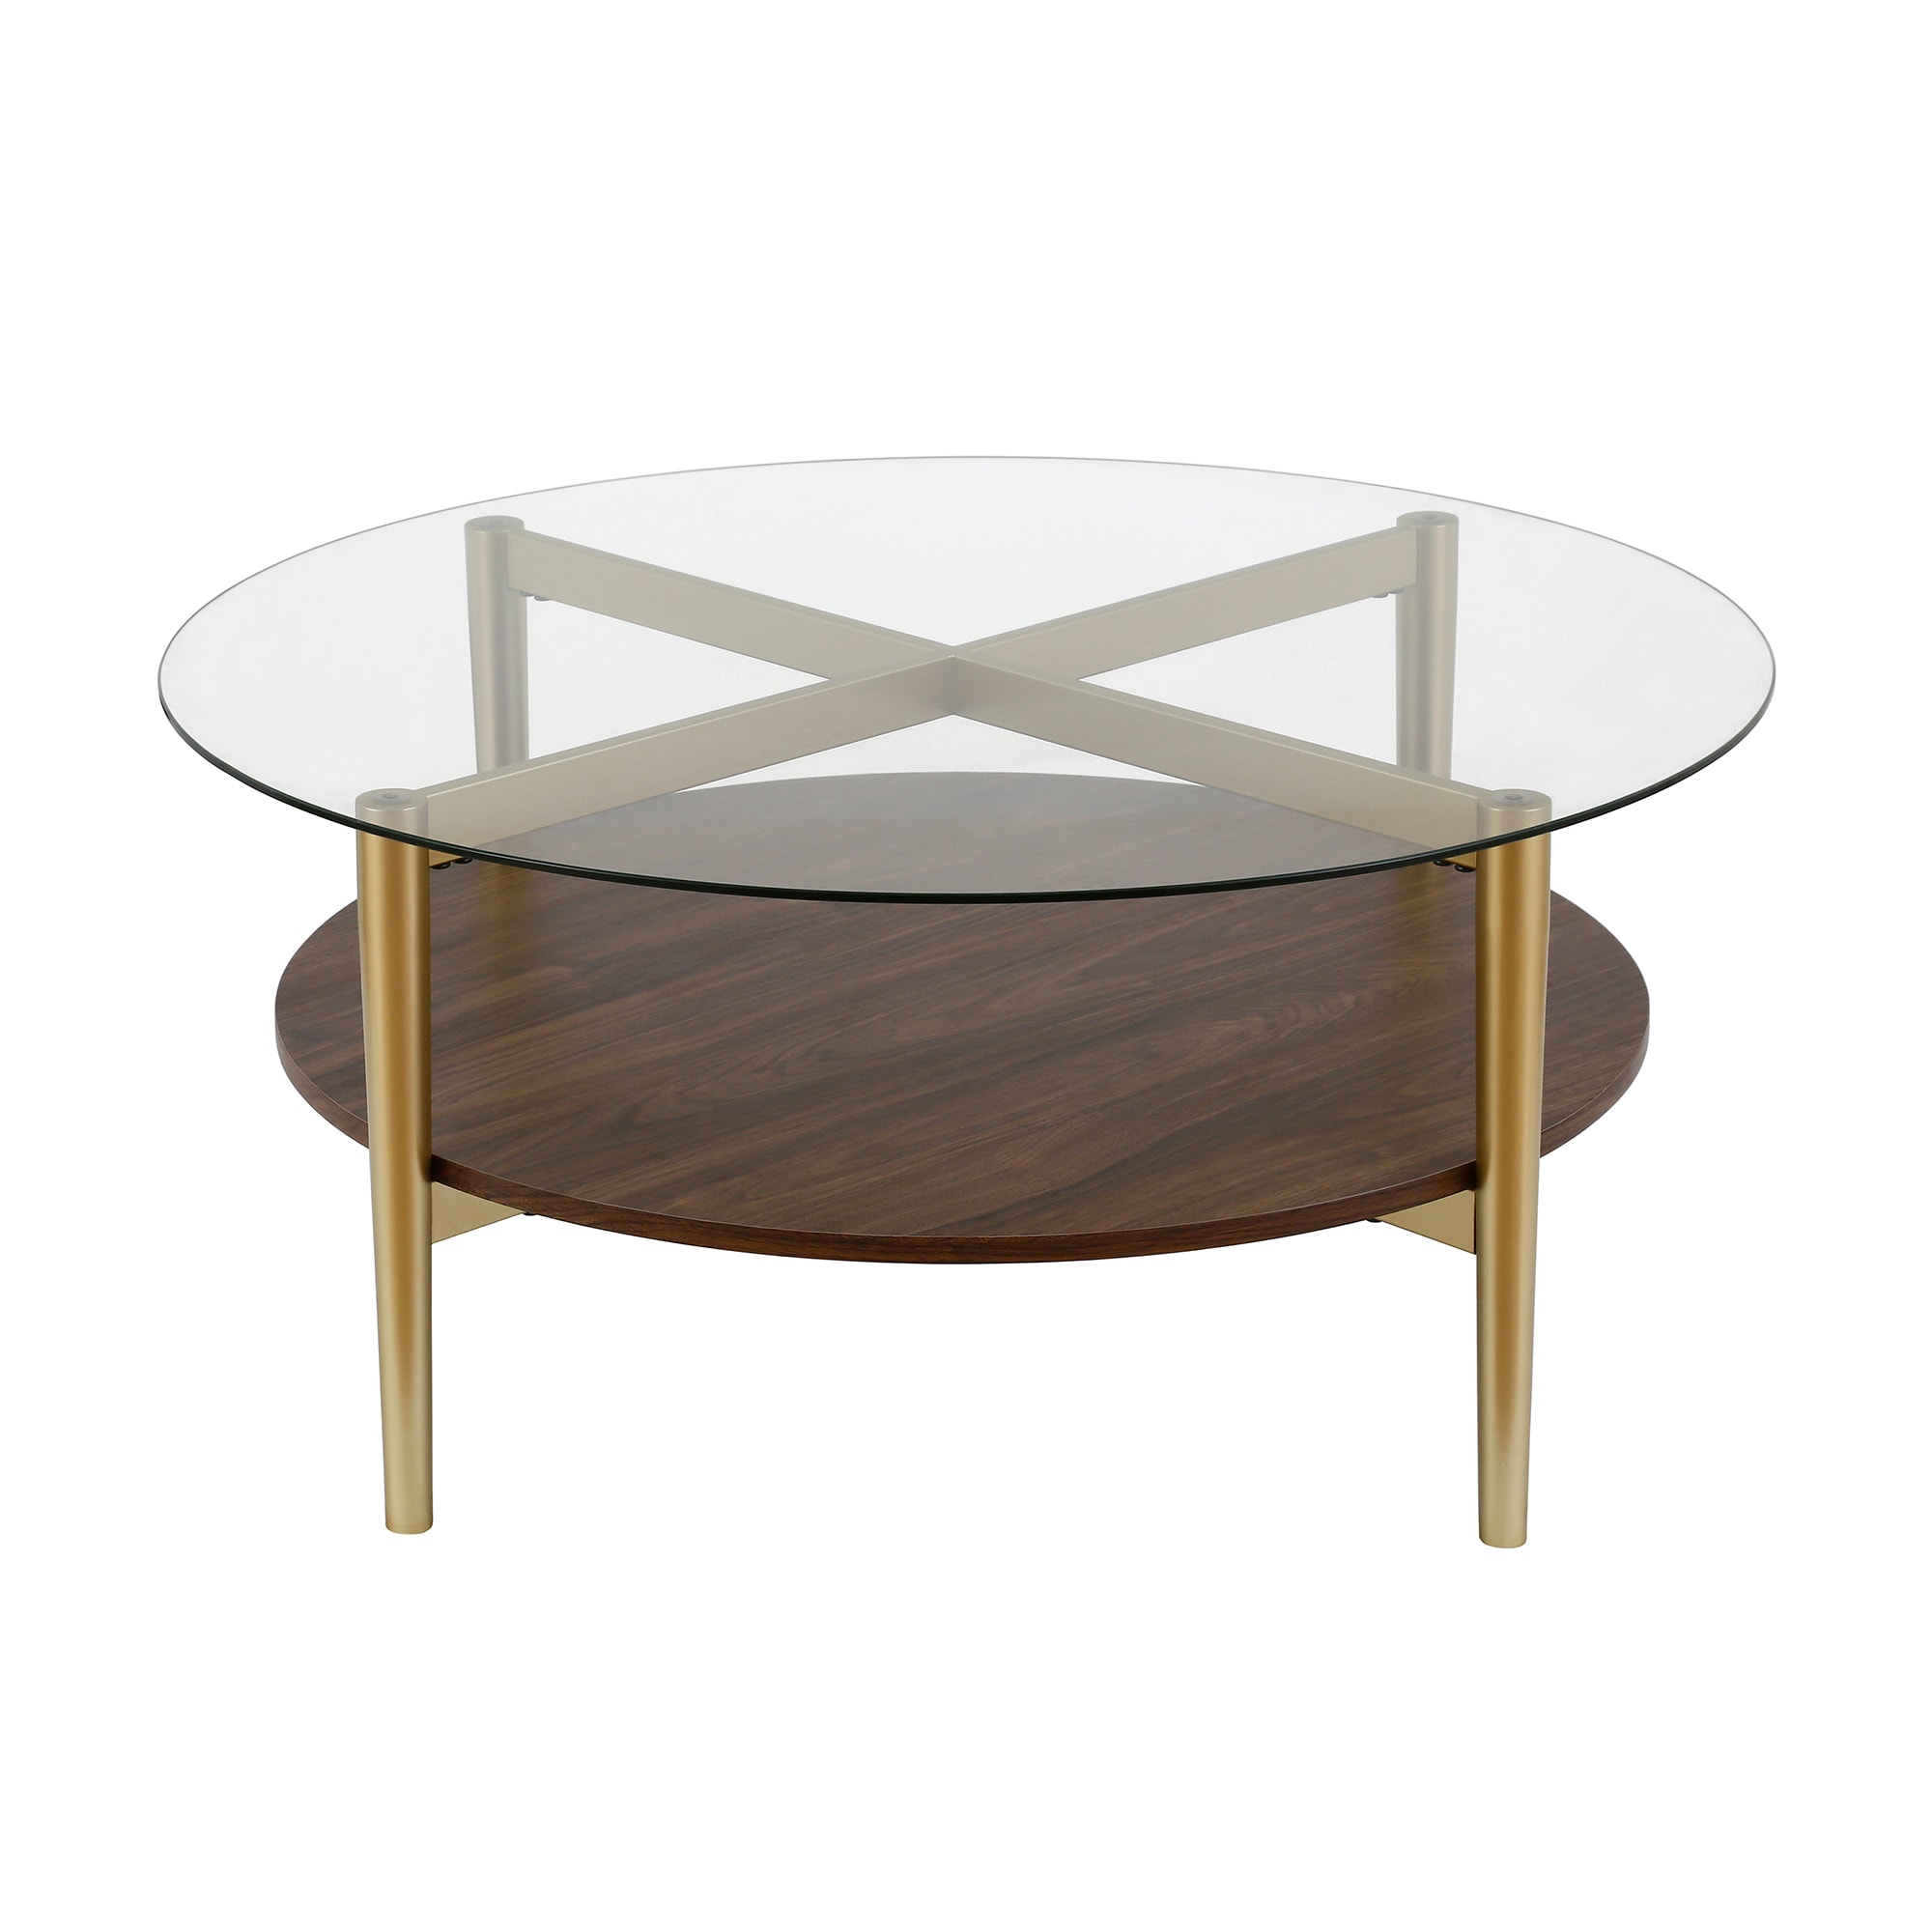 Hailey Home Ludo Gold and Walnut Glass Modern Coffee Table